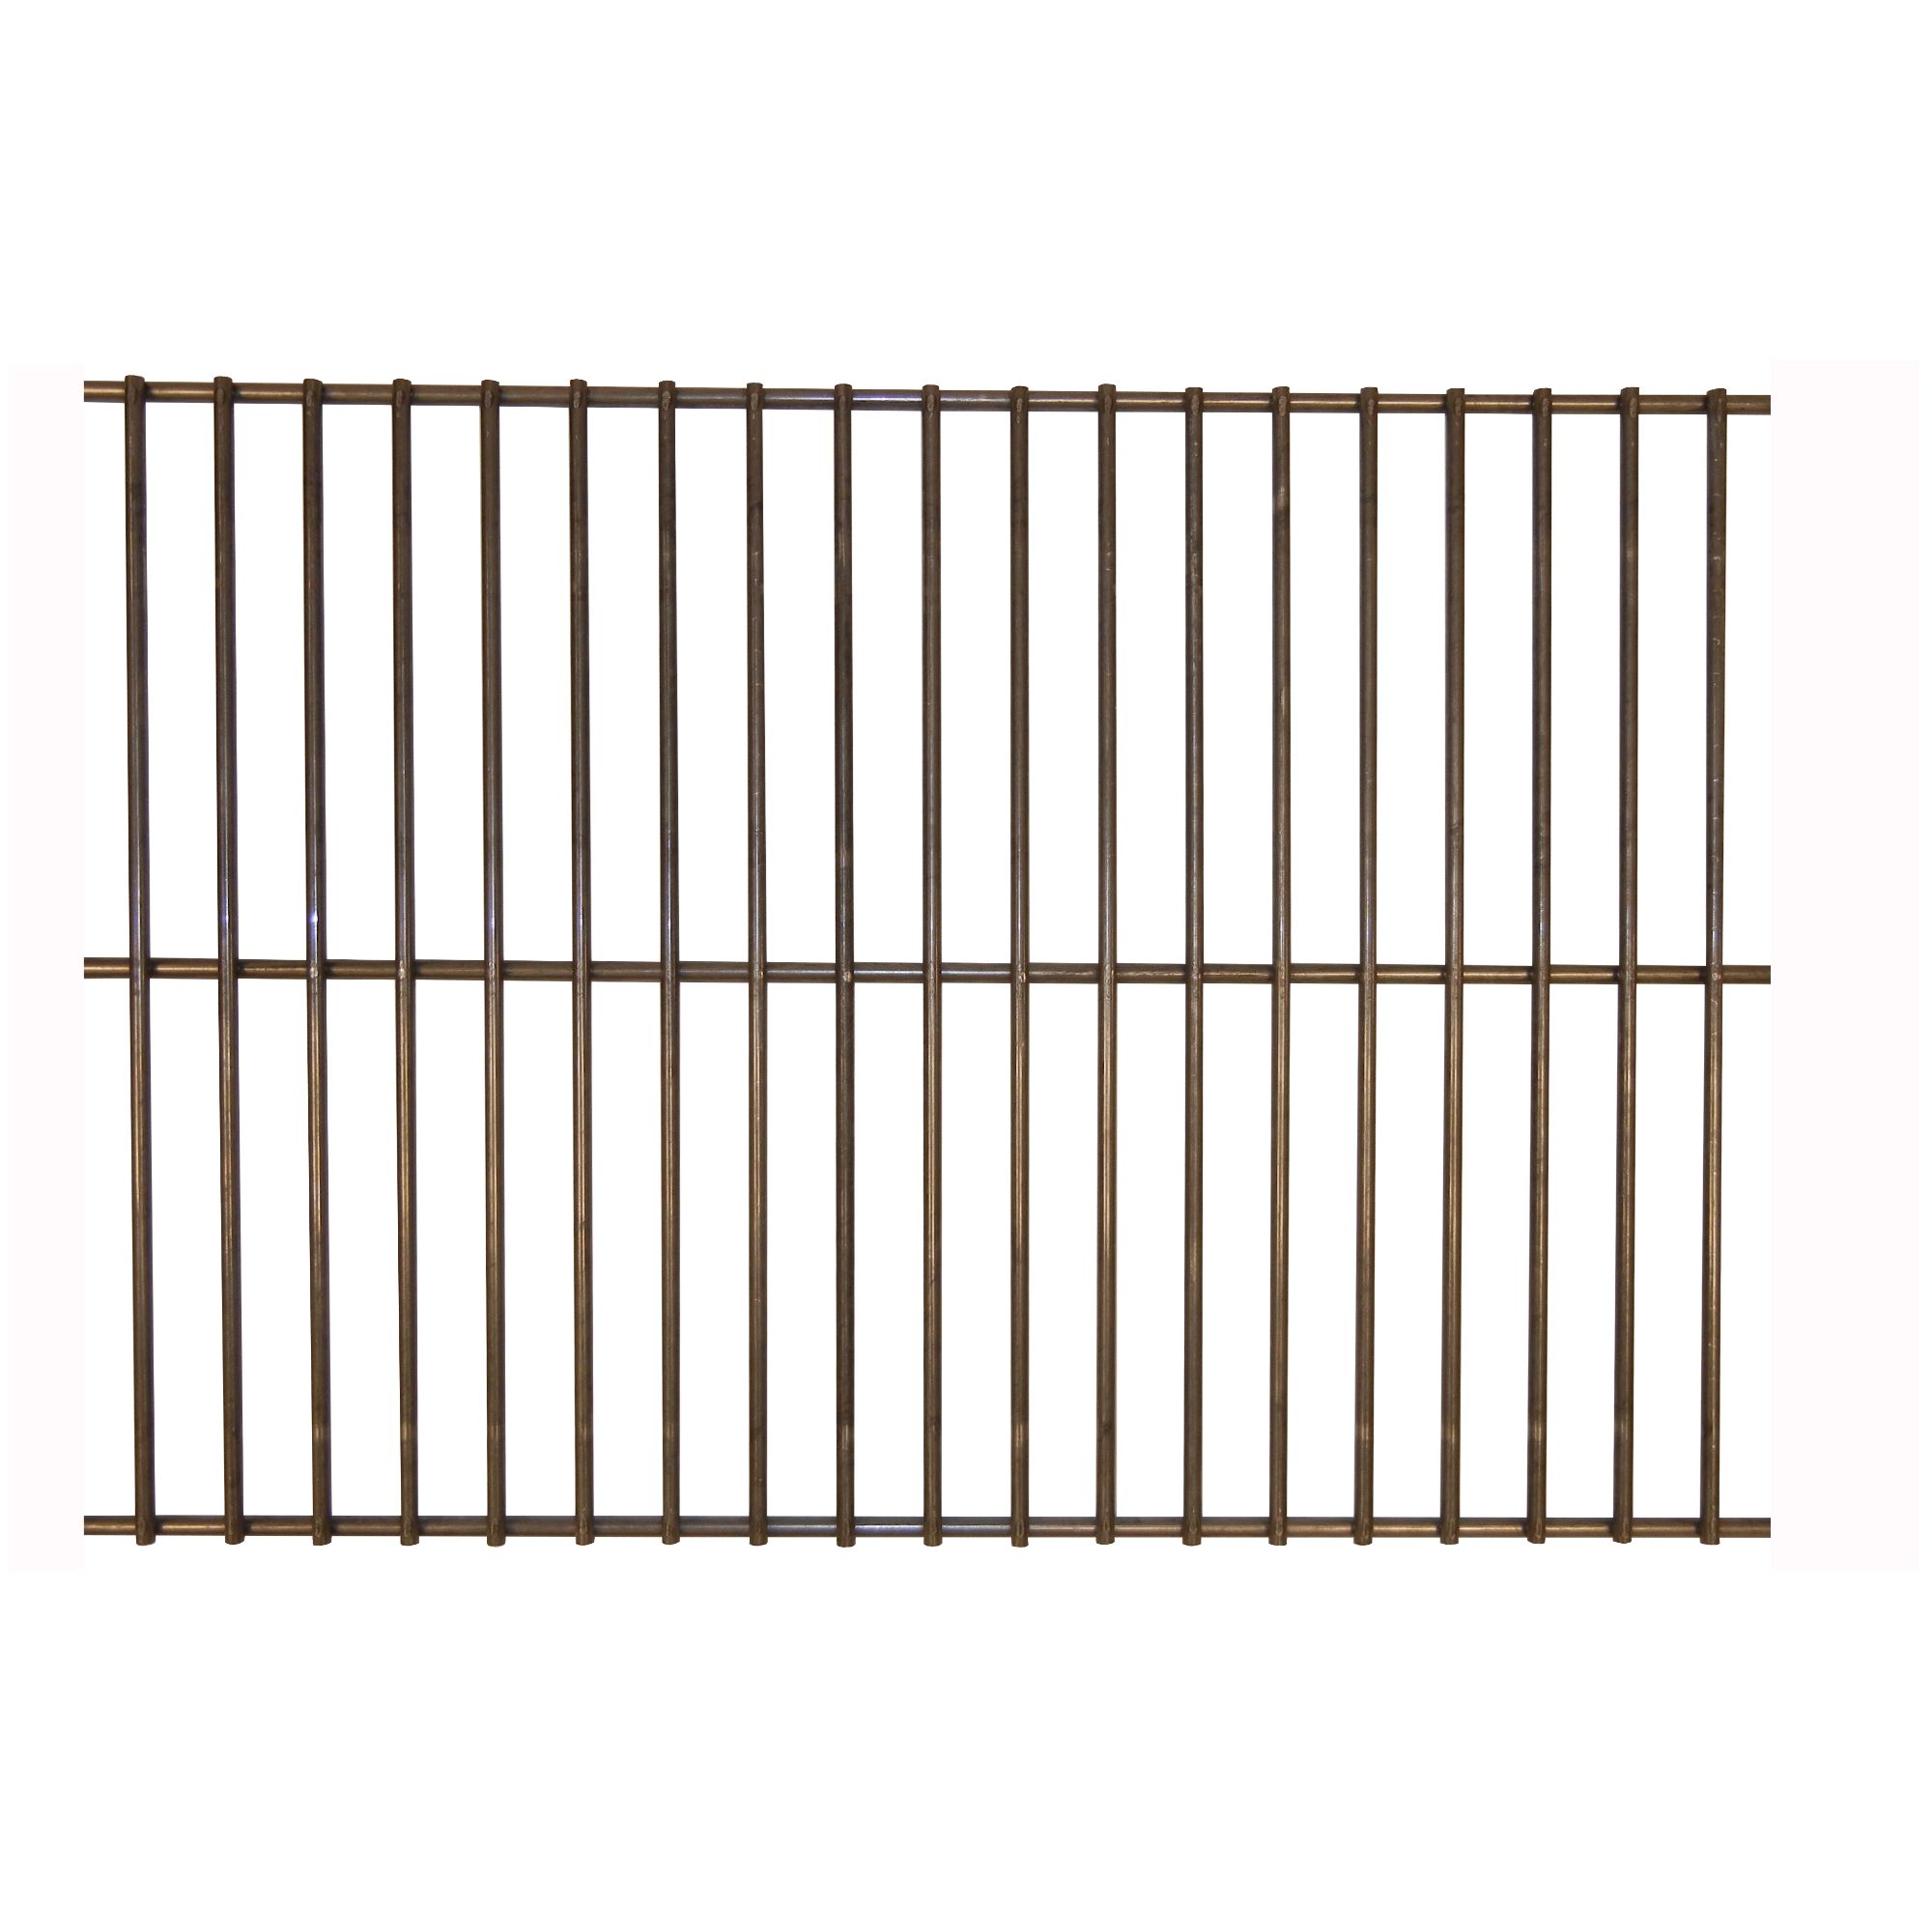 Steel wire rock grate for Charmglow brand gas grills